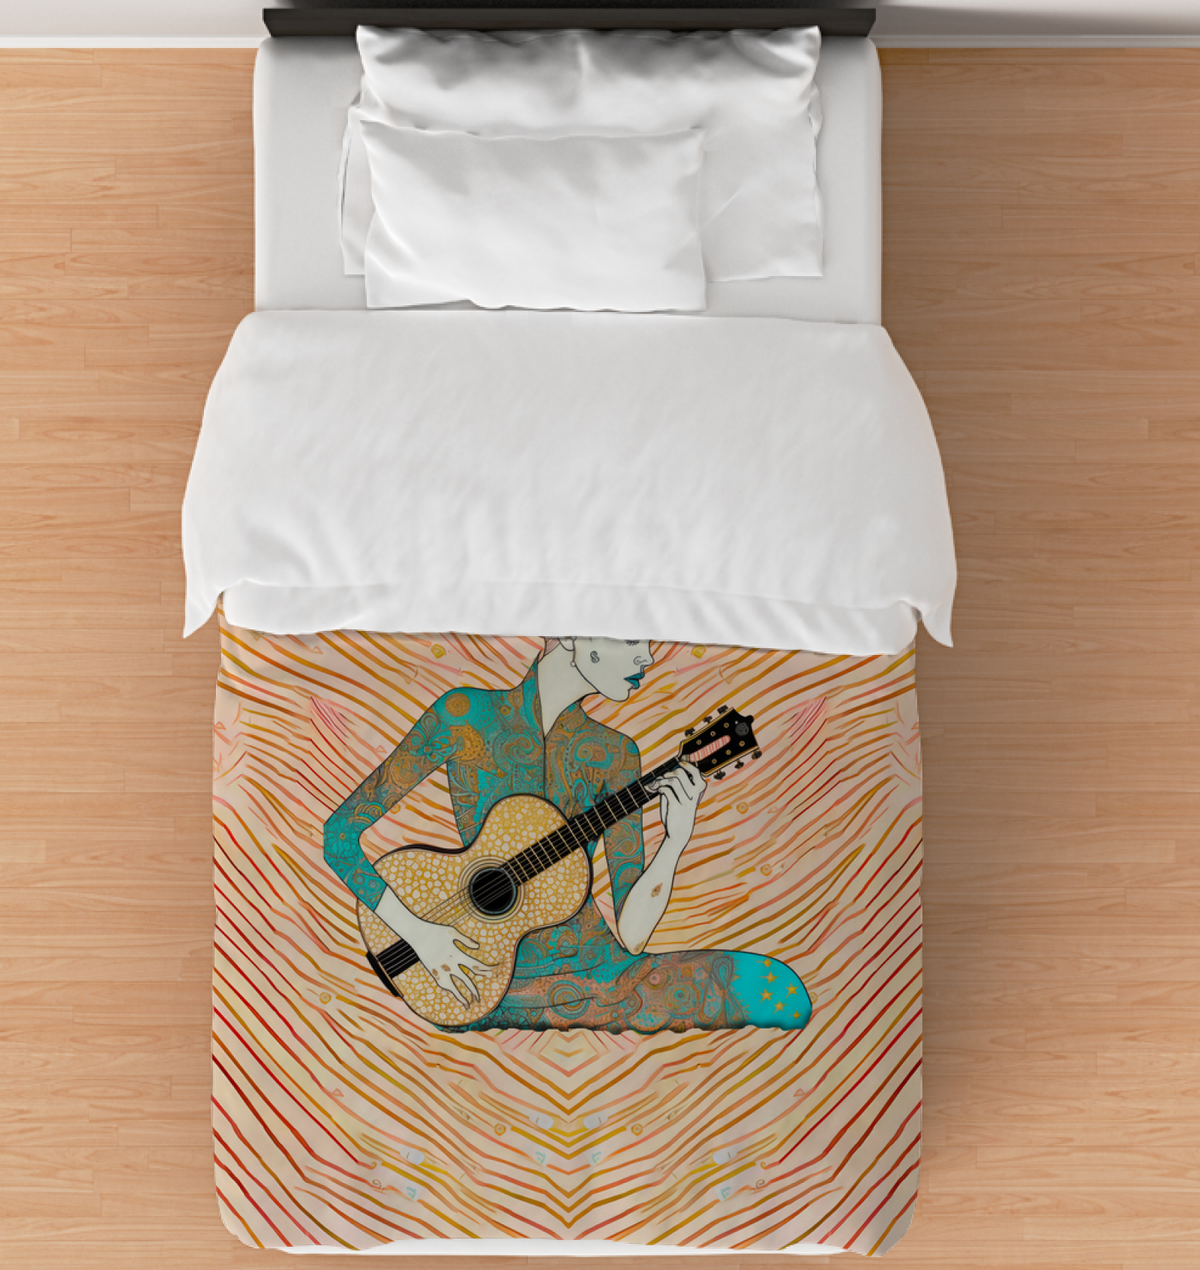 Colorful wildflower print on a cozy comforter, perfect for brightening up any bedroom decor.